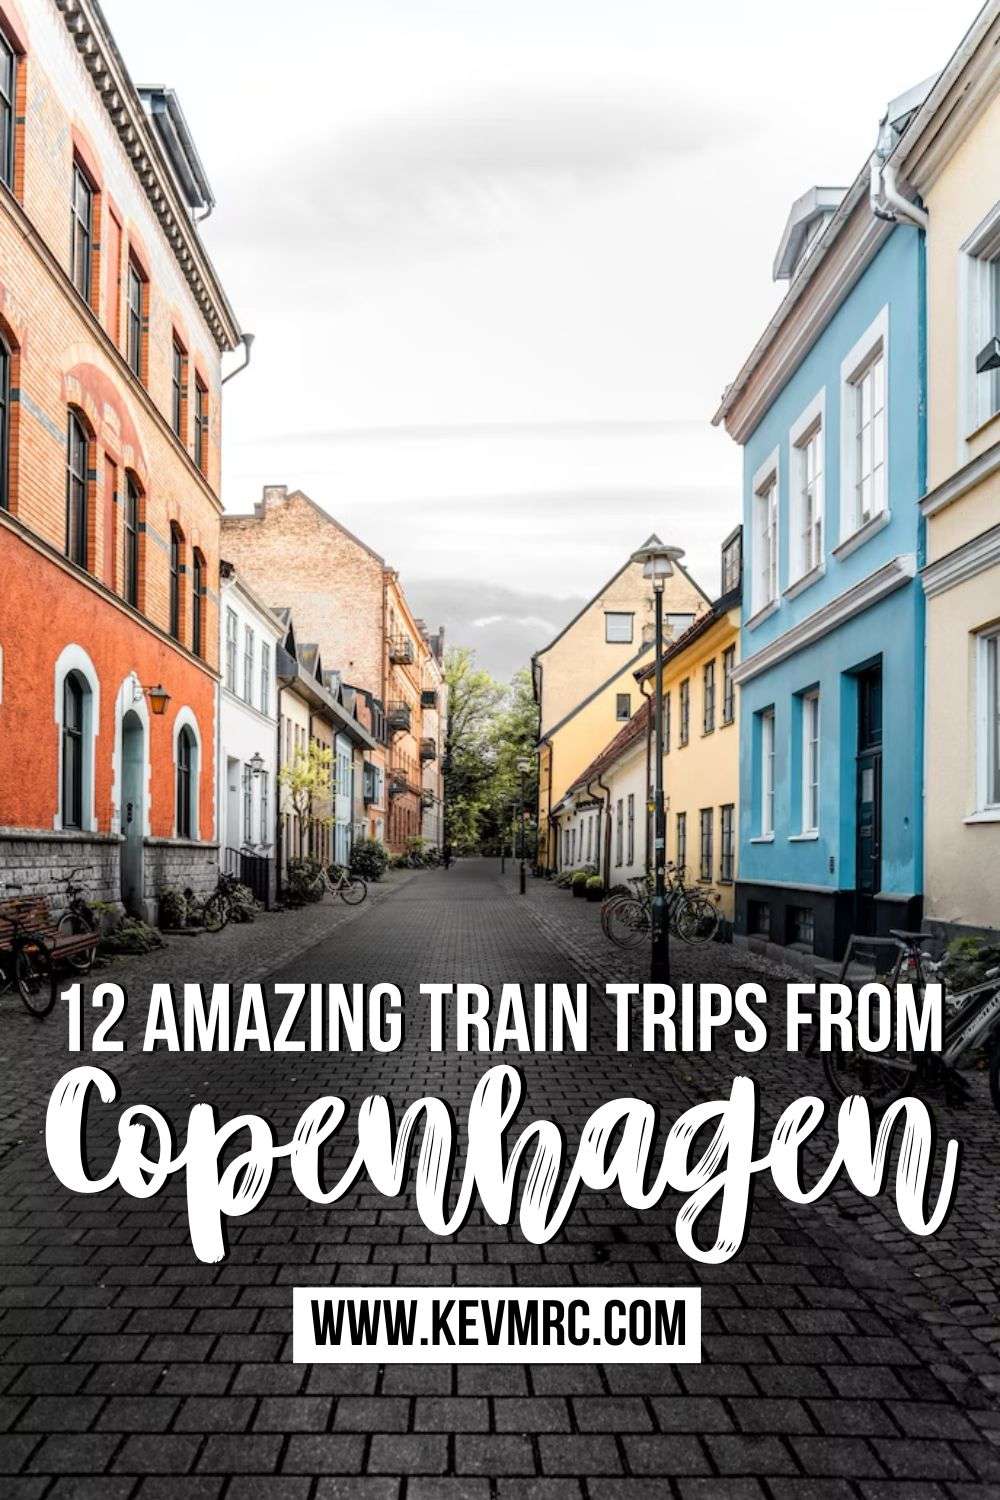 Going to Copenhagen soon? Don't forget to include a train trip to your schedule to discover another side of Denmark without going nuts about planning it. copenhagen day trips | copenhagen weekend trip | copenhagen denmark travel #copenhagen